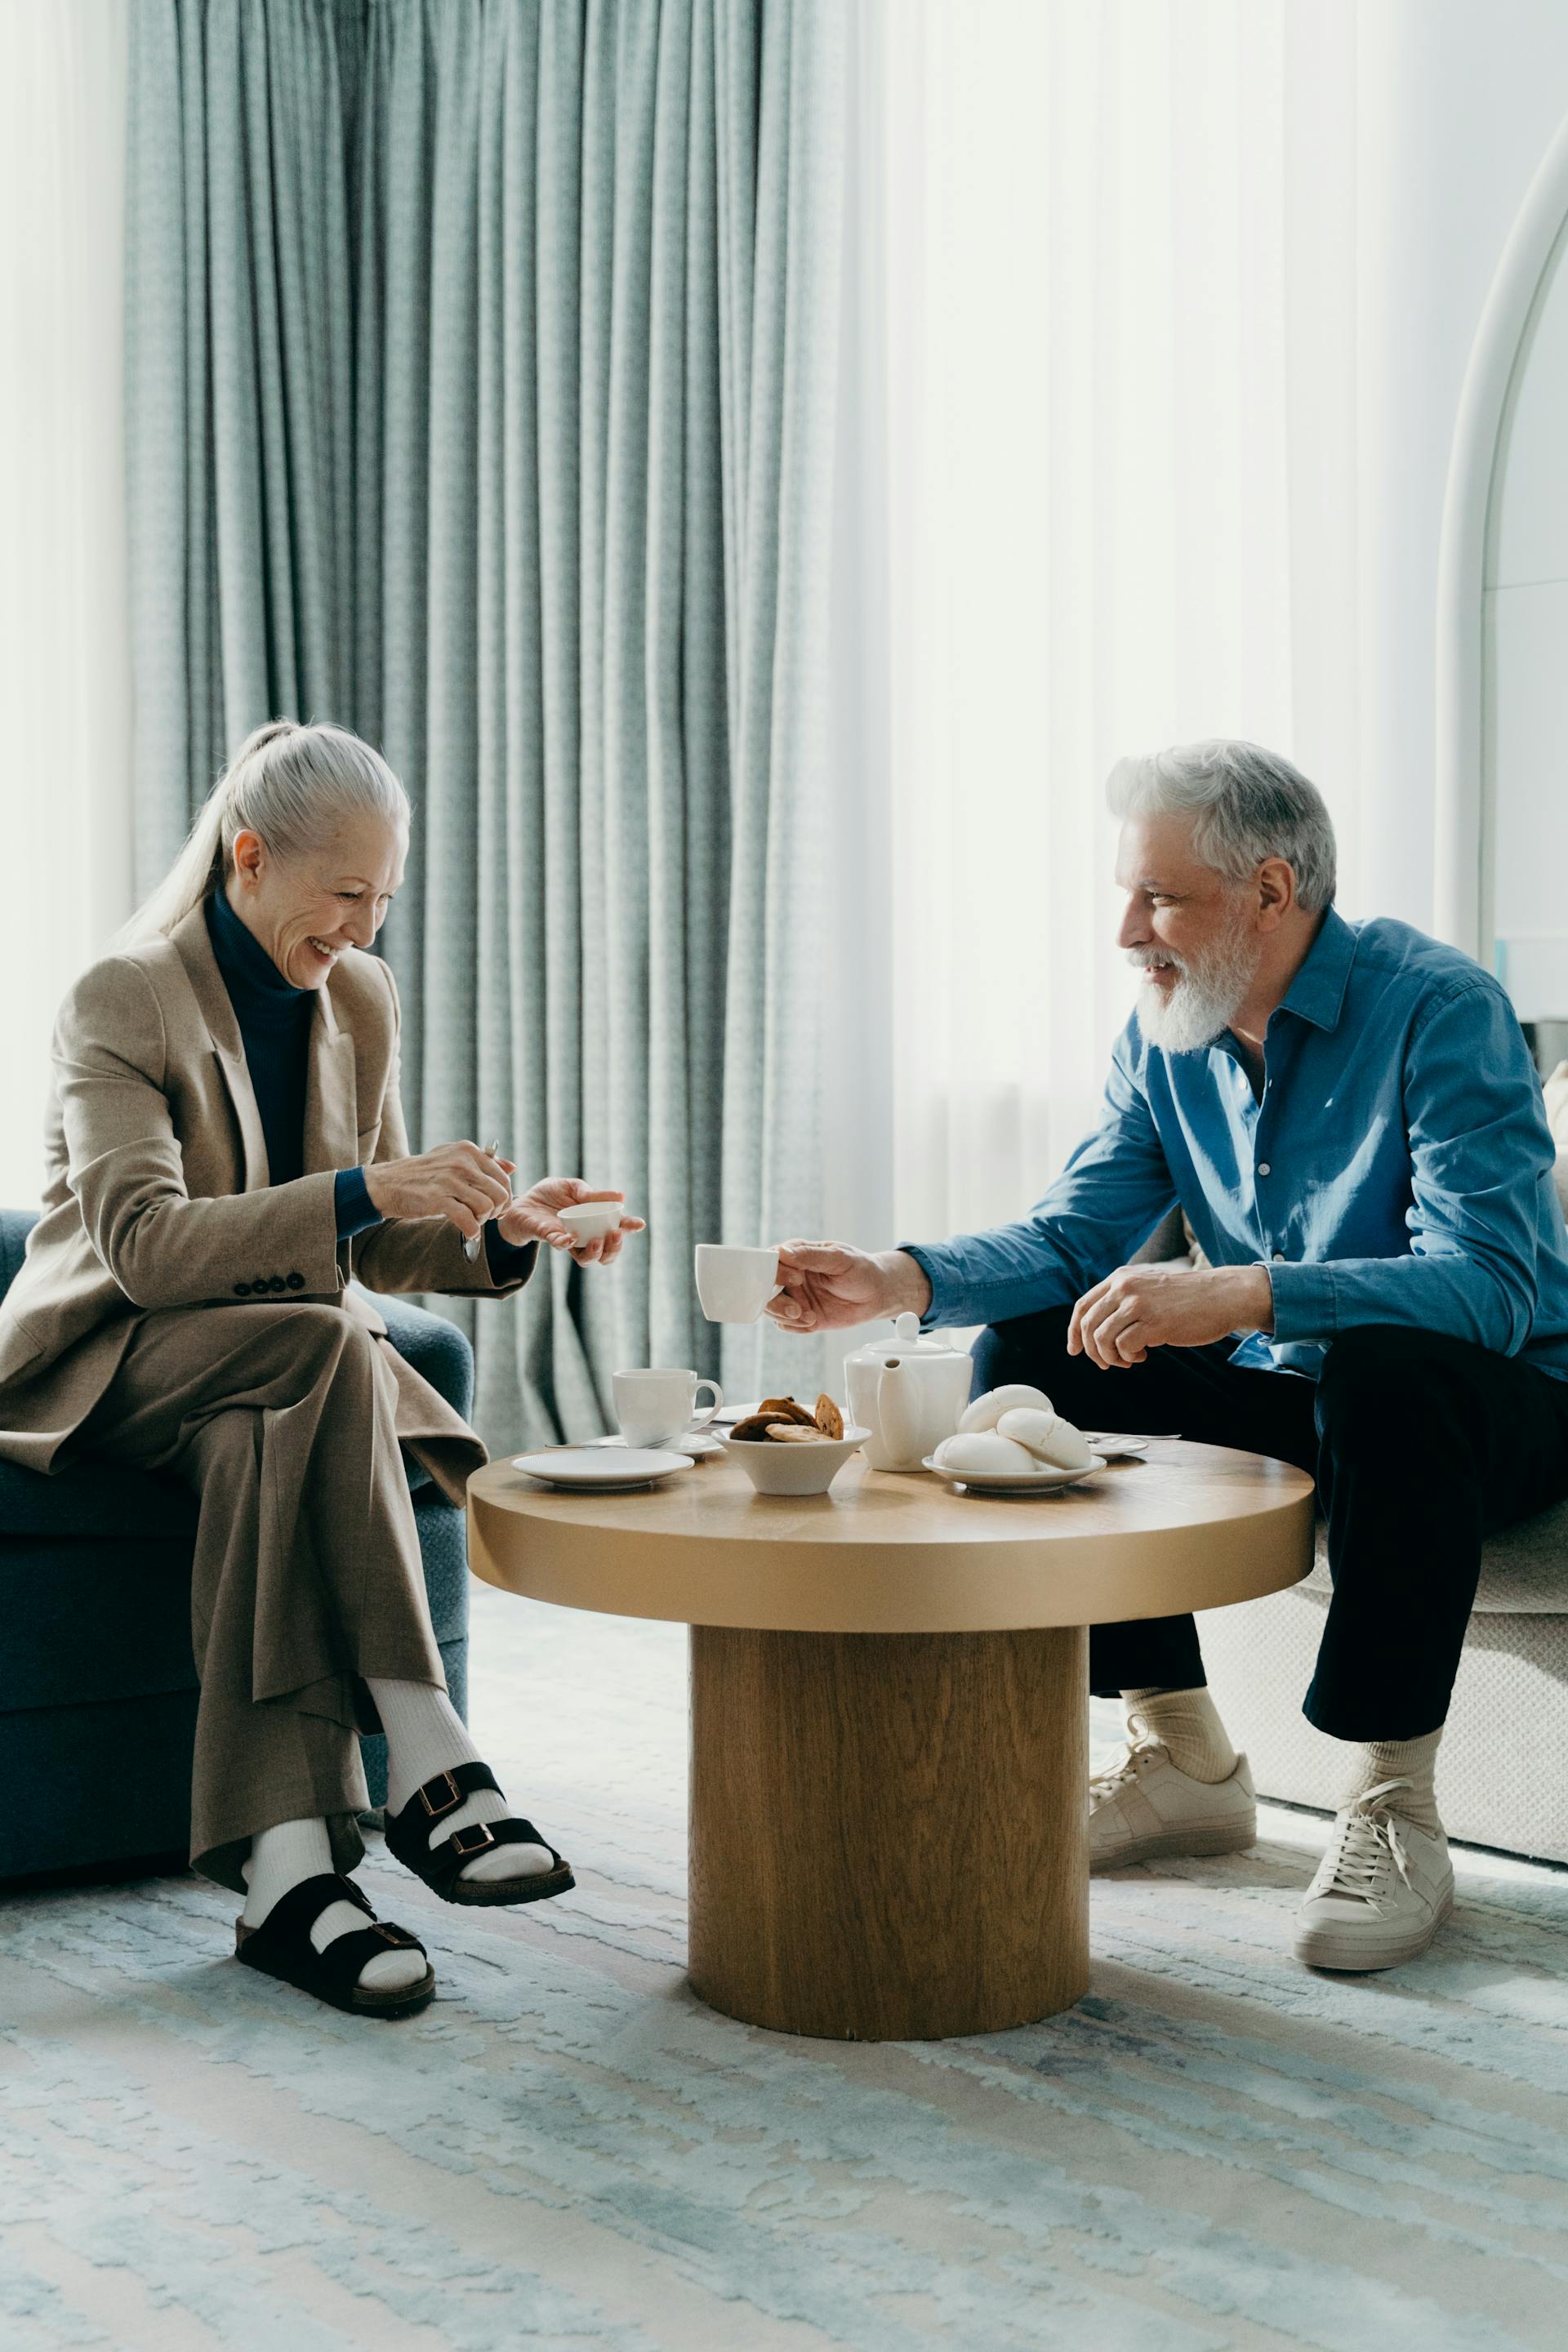 An elderly couple spending time with each other | Source: Pexels